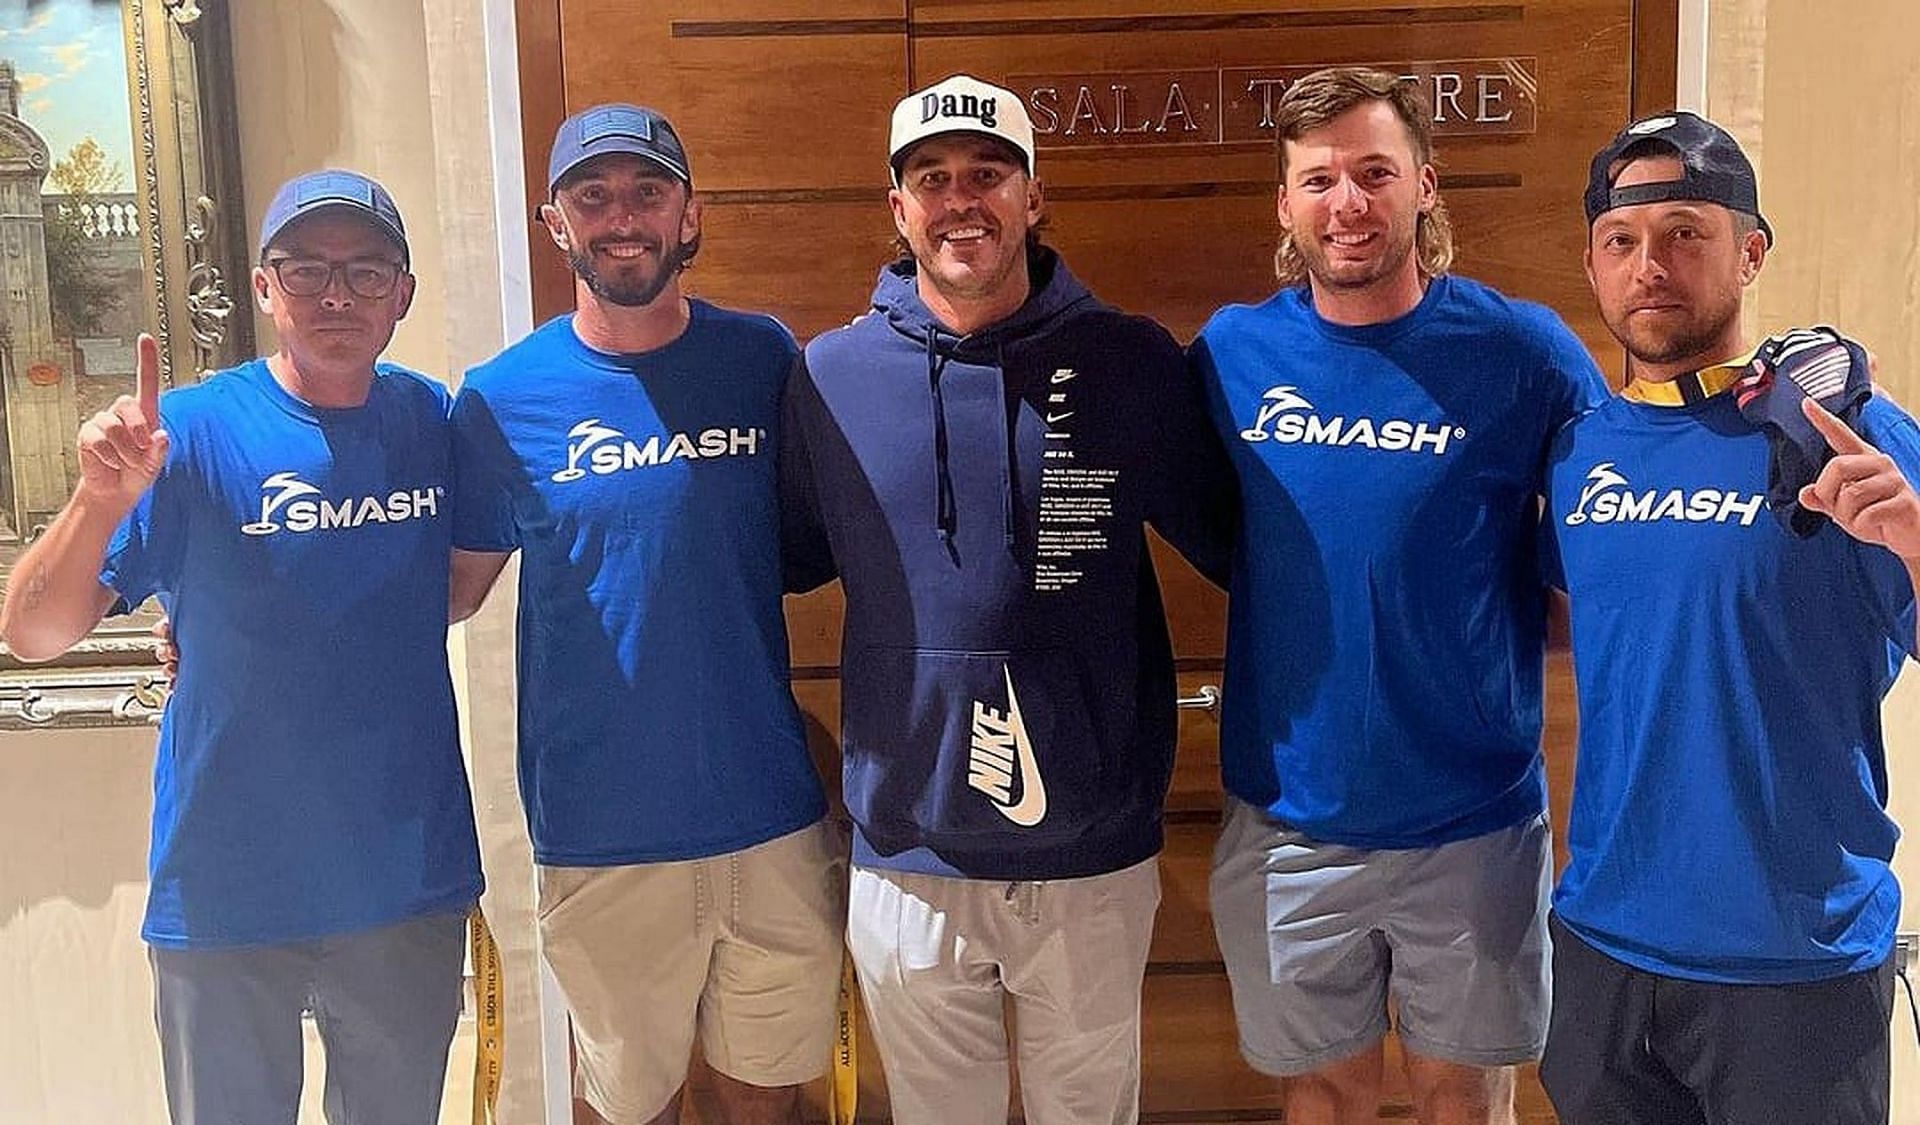 Phil Mickelson surprised as Team USA players ft. Brooks Koepka, Max Homa pose in LIV Golf merchandise post Ryder Cup defeat